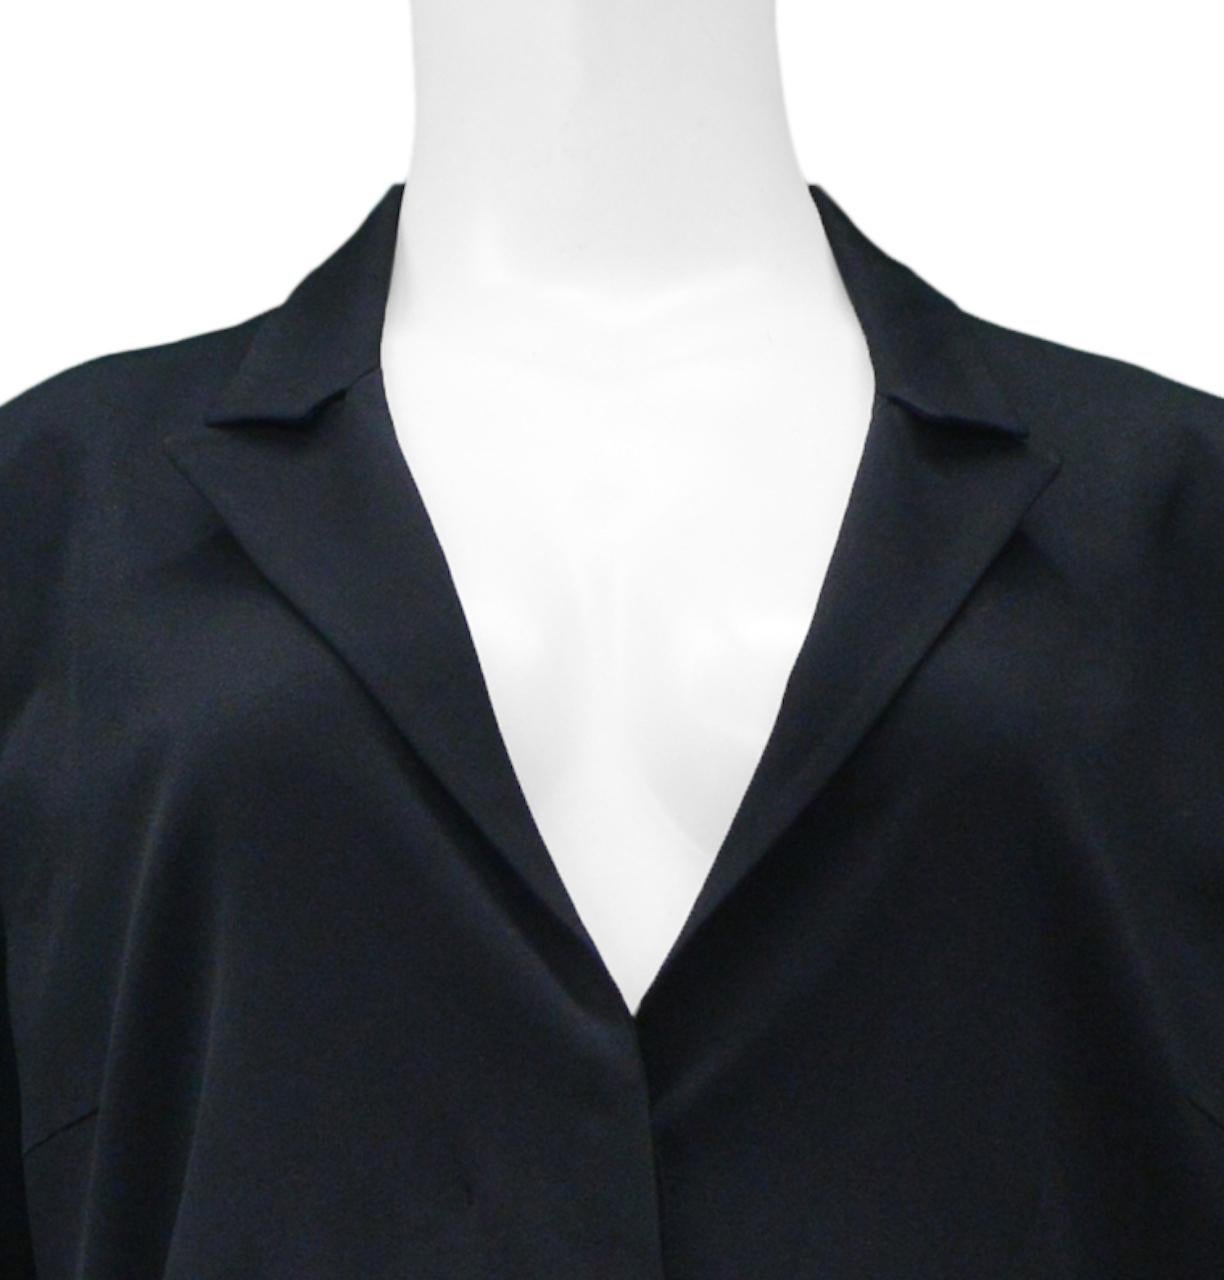 Jil Sander By Raf Simons Navy Fringe Blazer 2009 In Excellent Condition For Sale In Los Angeles, CA